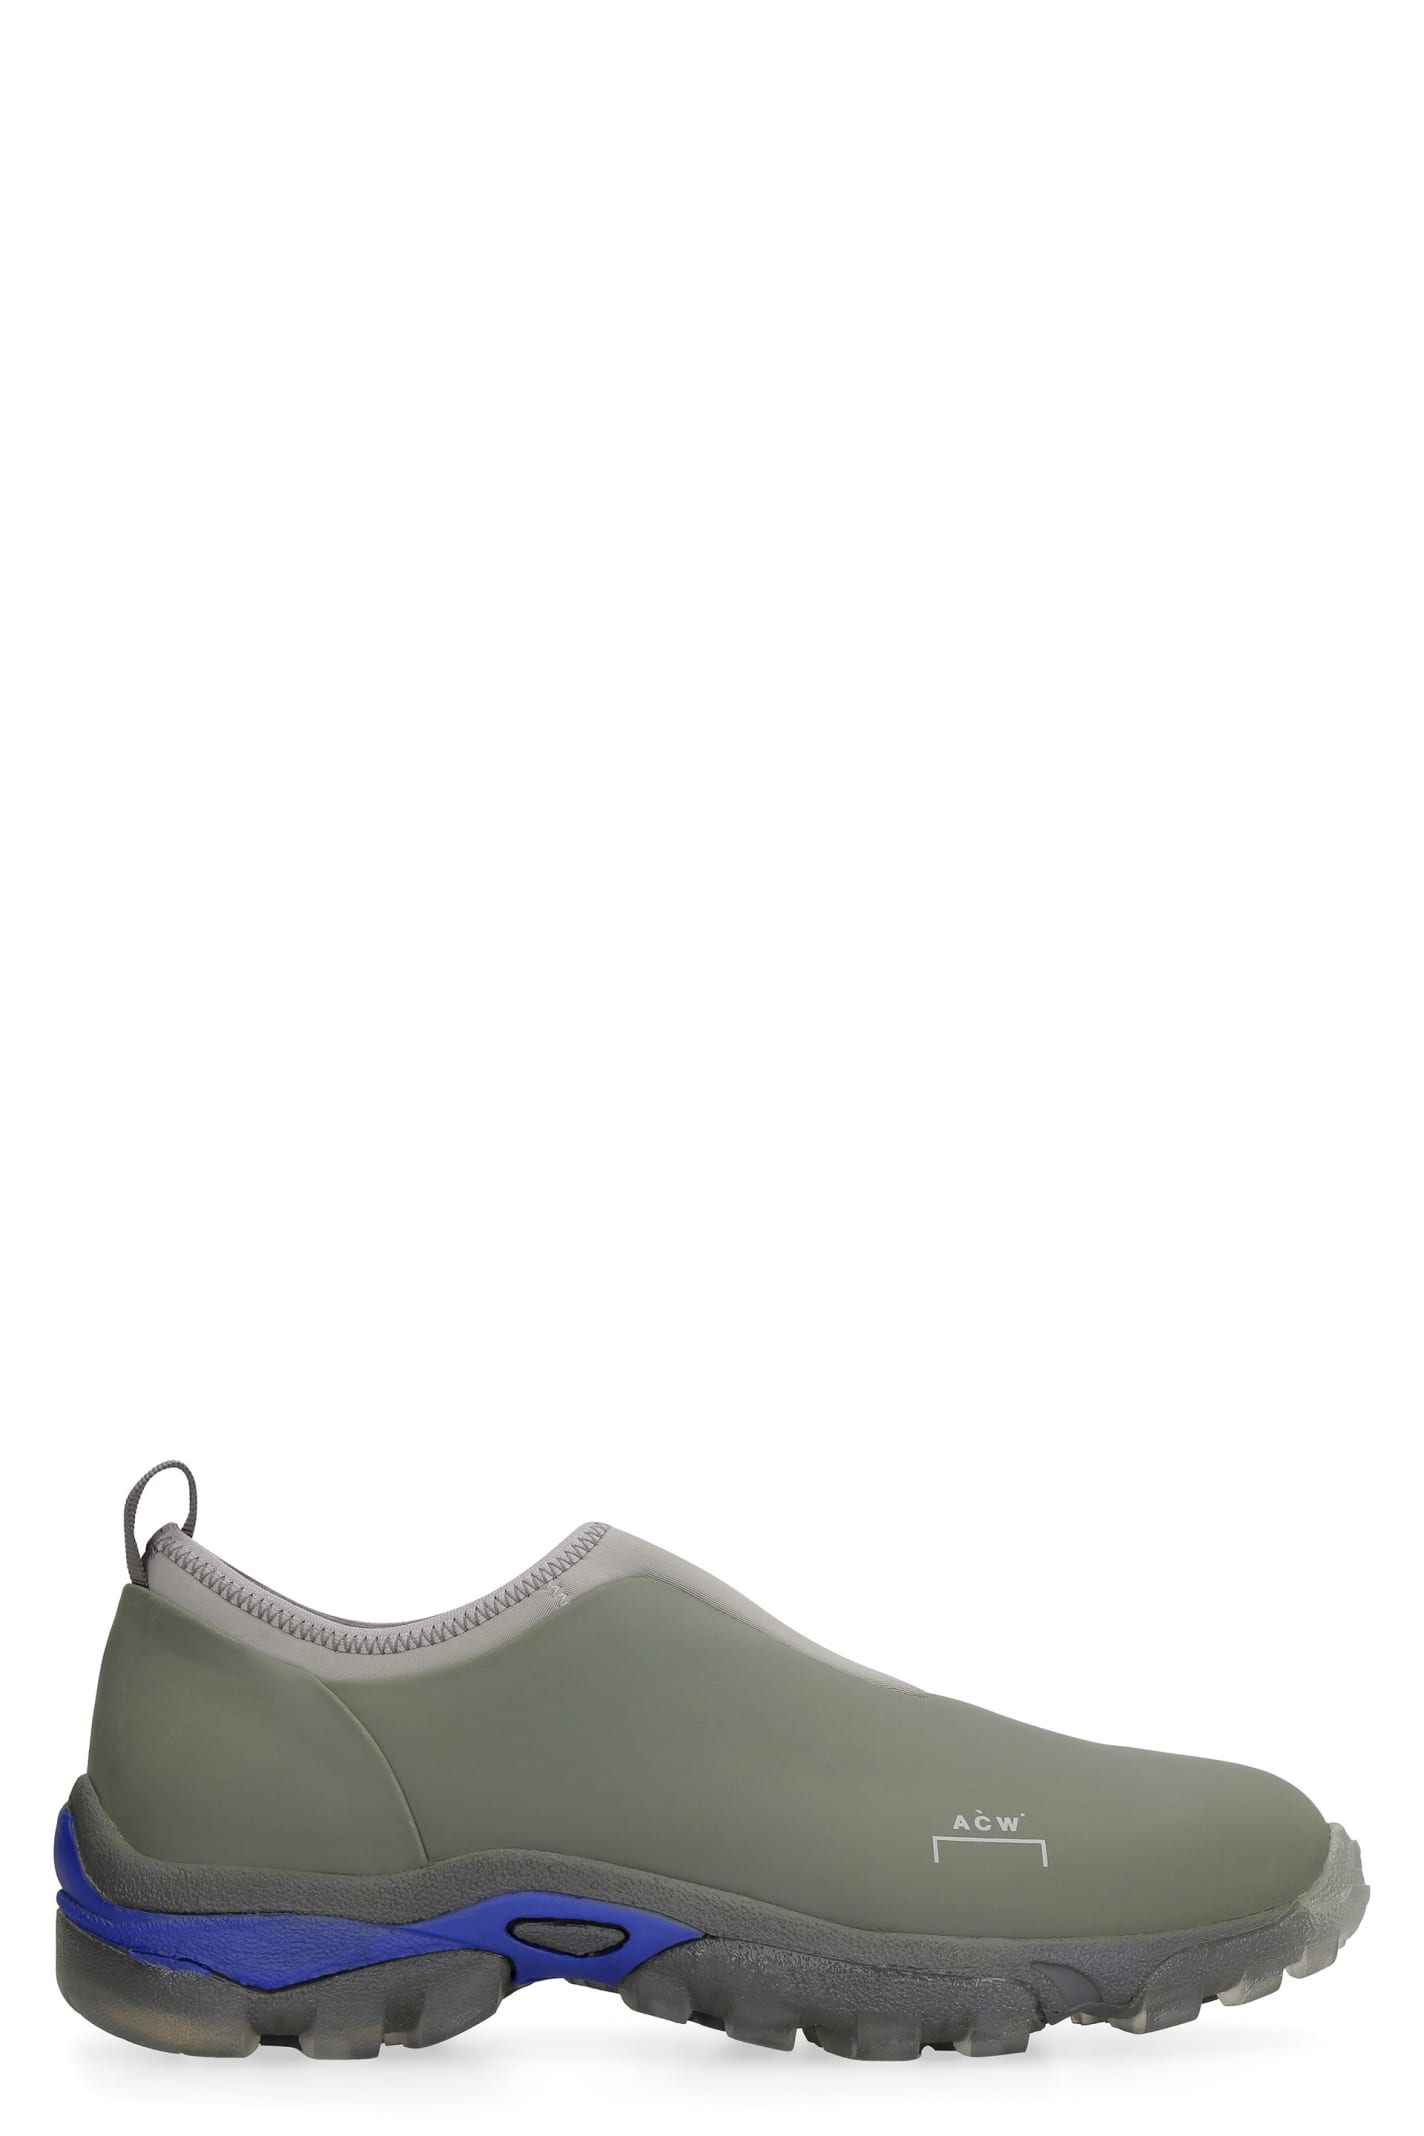 A-COLD-WALL Techno-fabric And Leather Slip On